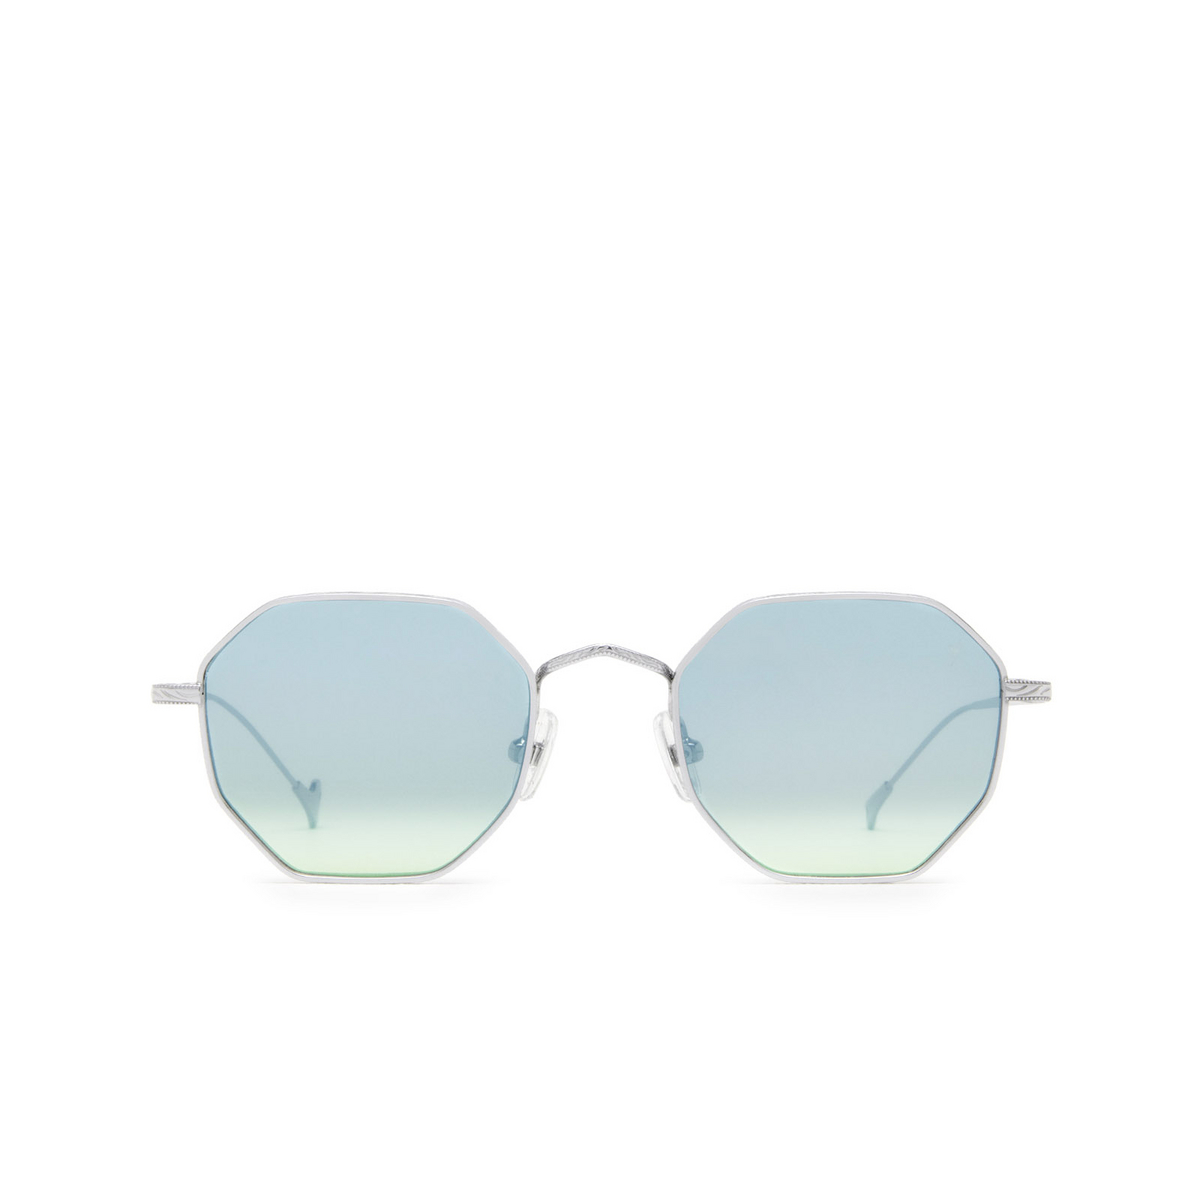 Eyepetizer® Irregular Sunglasses: Hort color Silver C.1-23F - front view.